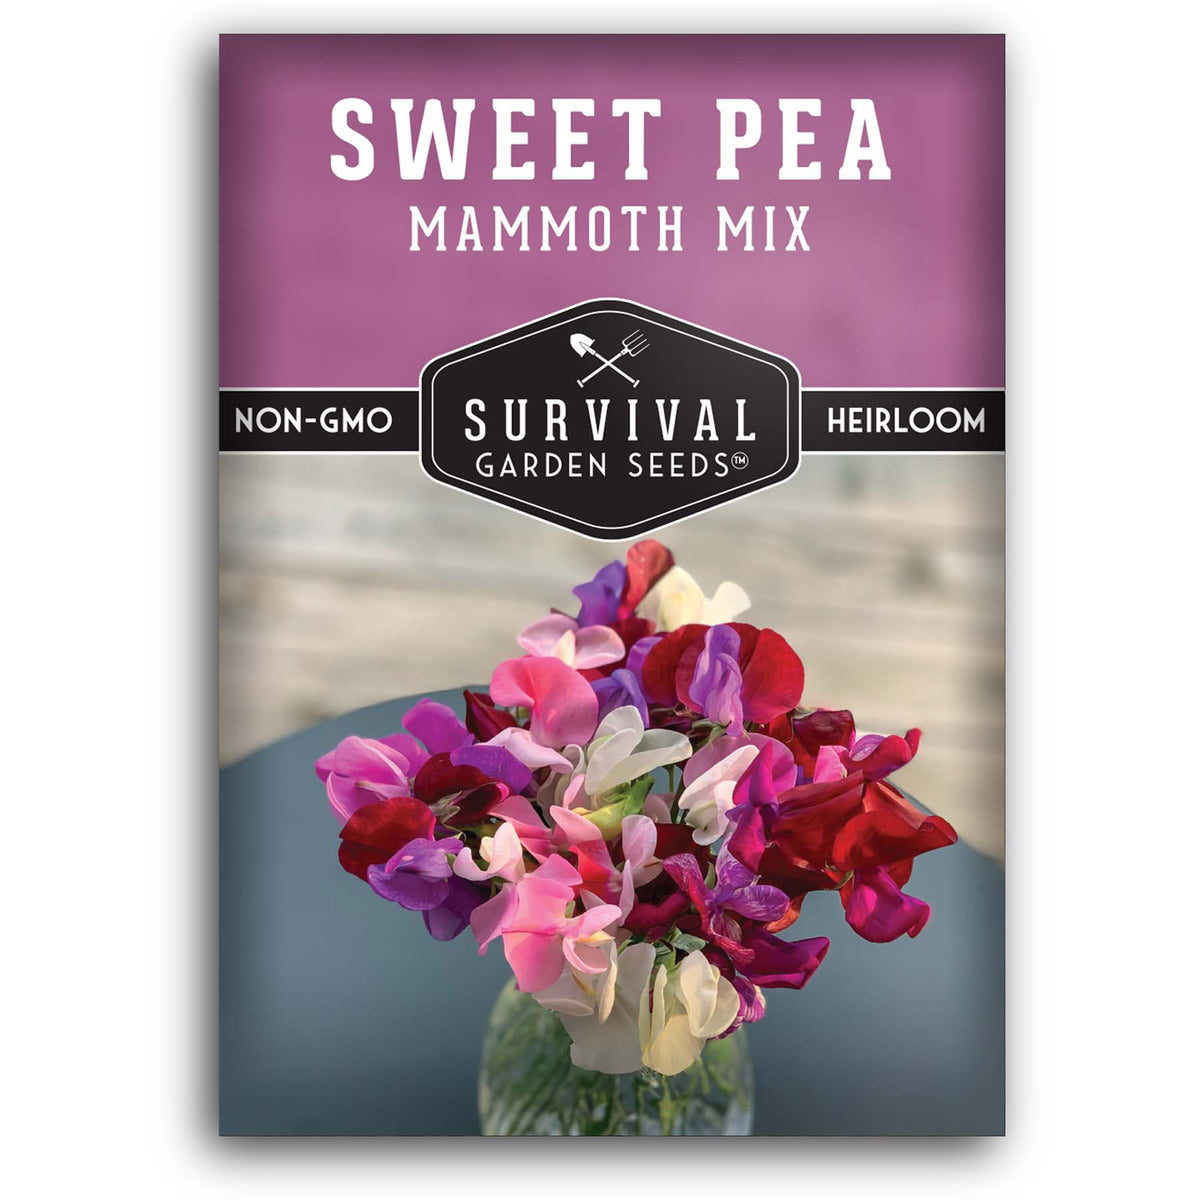 Mammoth Mix of Sweet Pea Flower Seeds